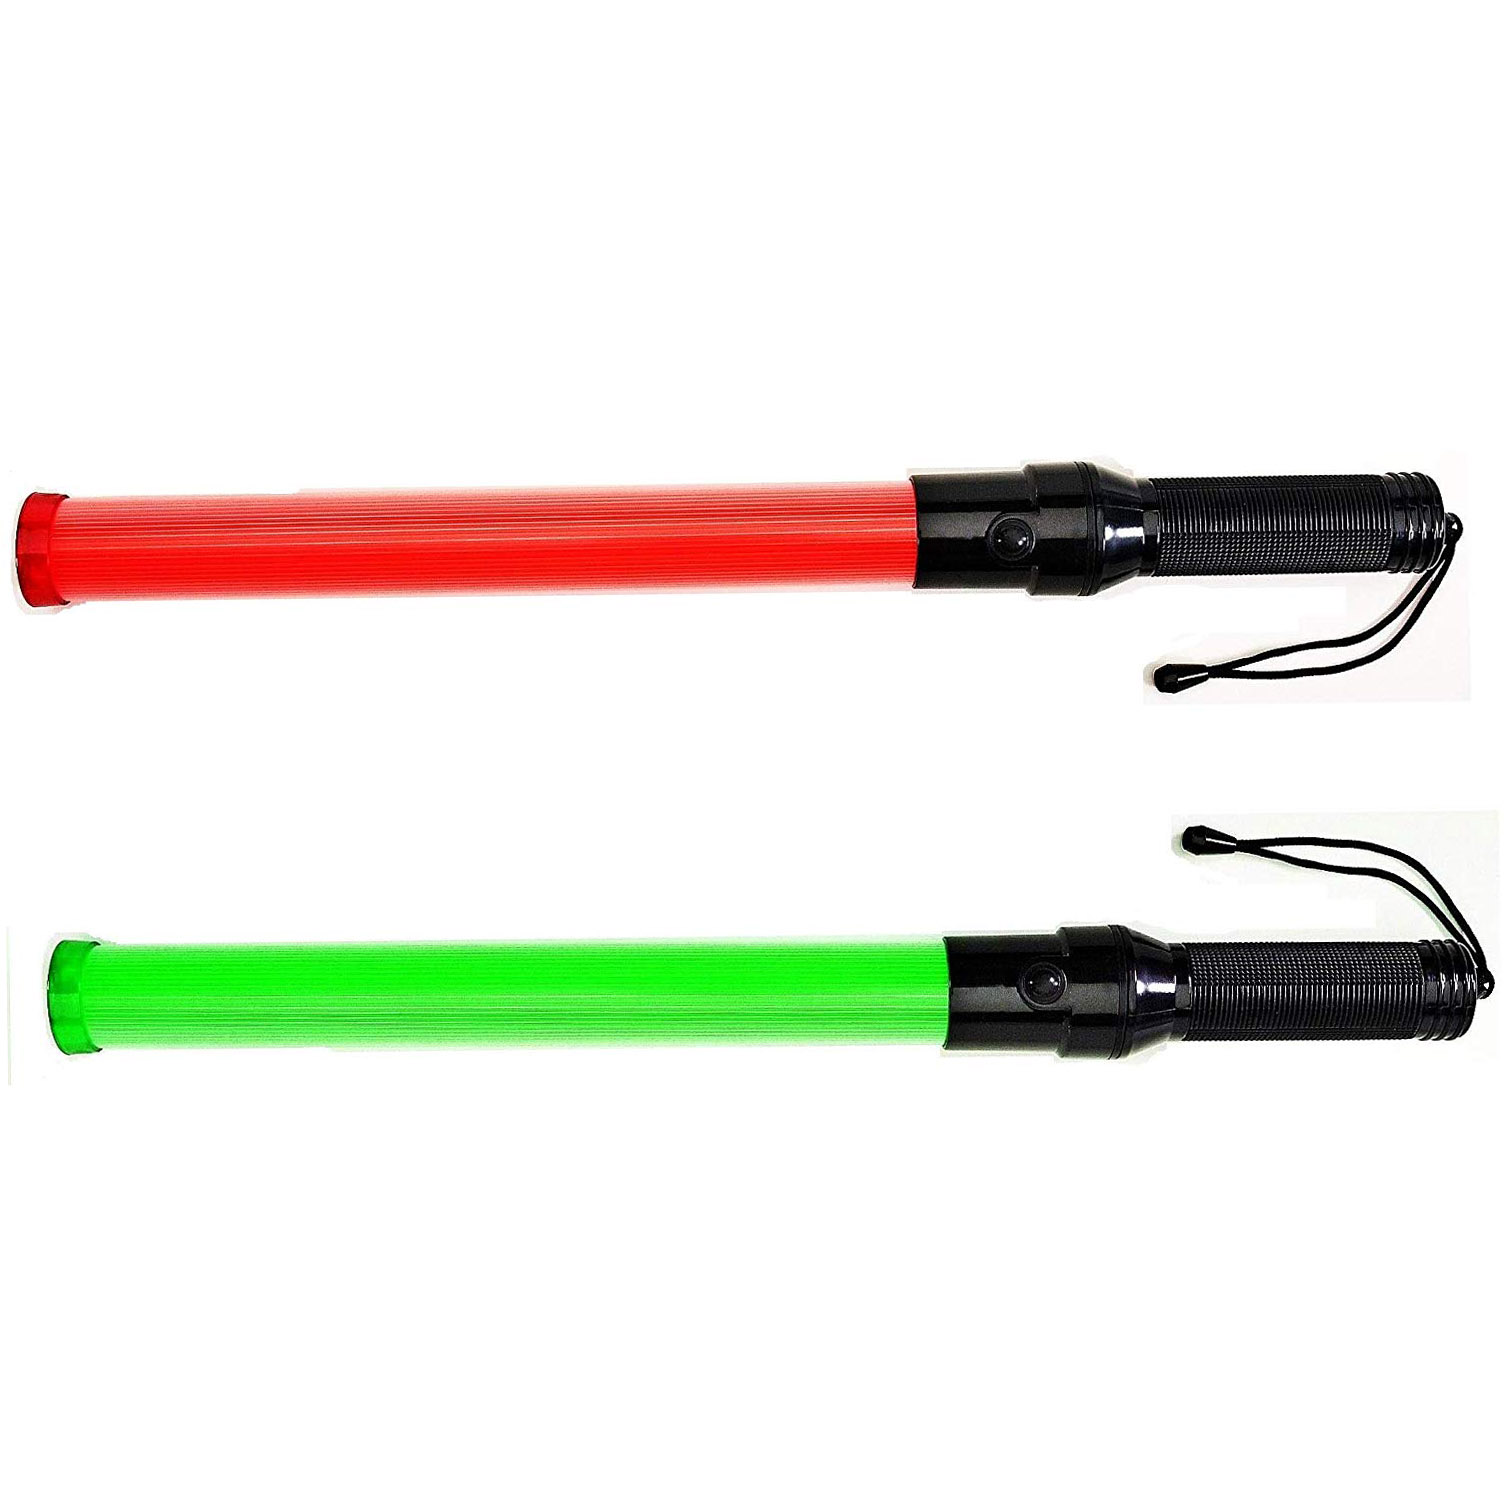 Buy Traffic Baton Yt-966 -Two In One-Red/Green Online | Safety | Qetaat.com